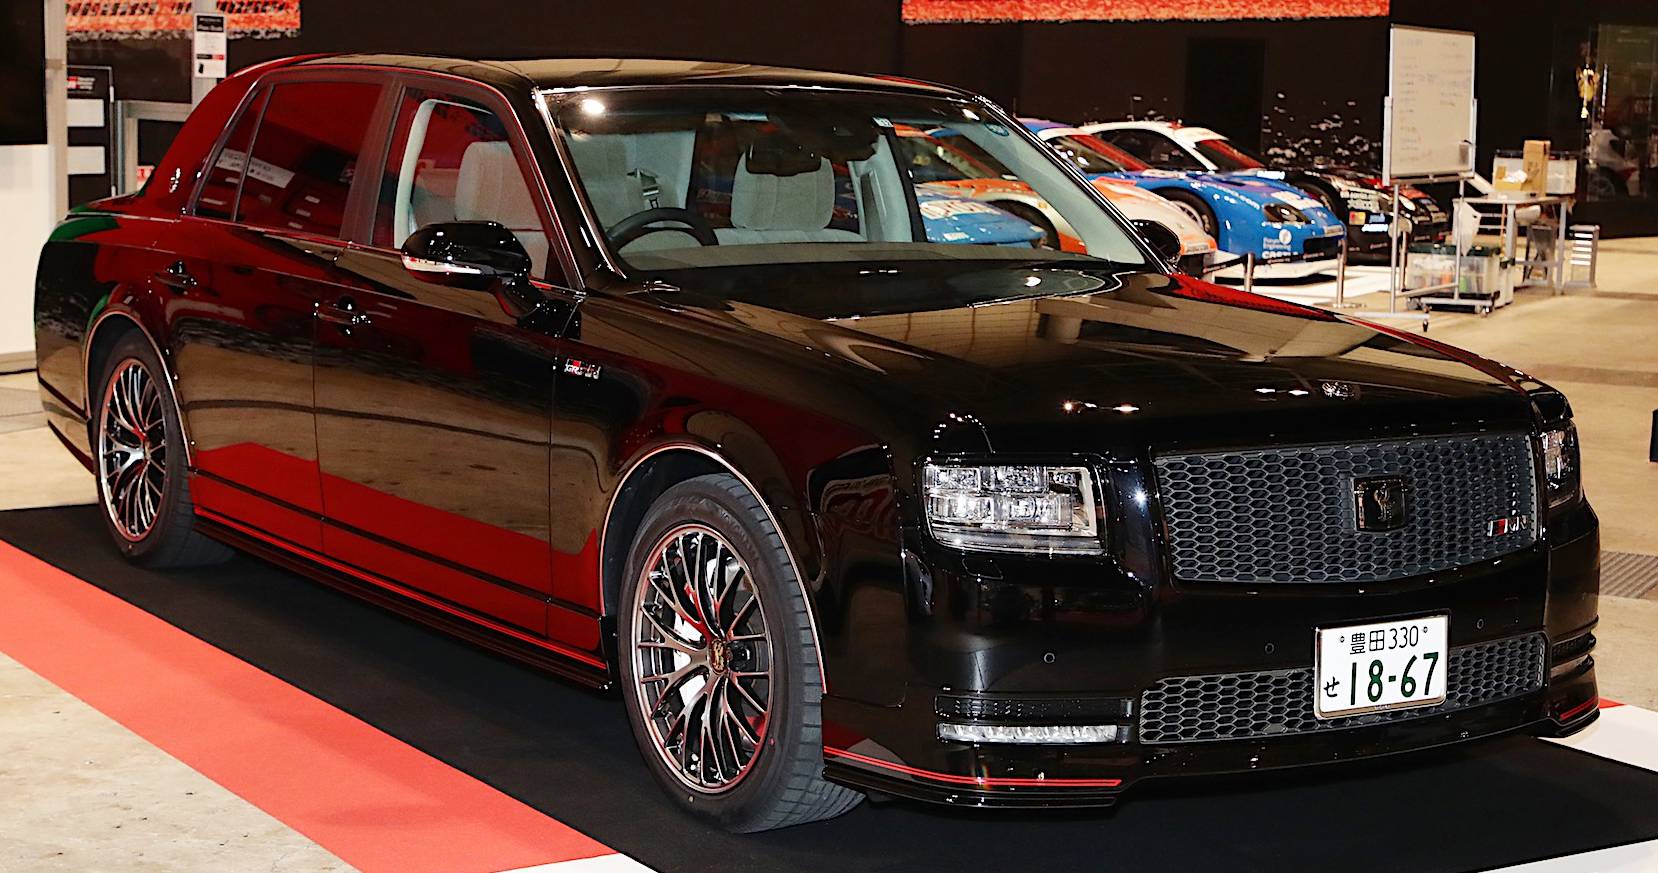 There's Also A Black Toyota Century GRMN – And It's Even Cooler